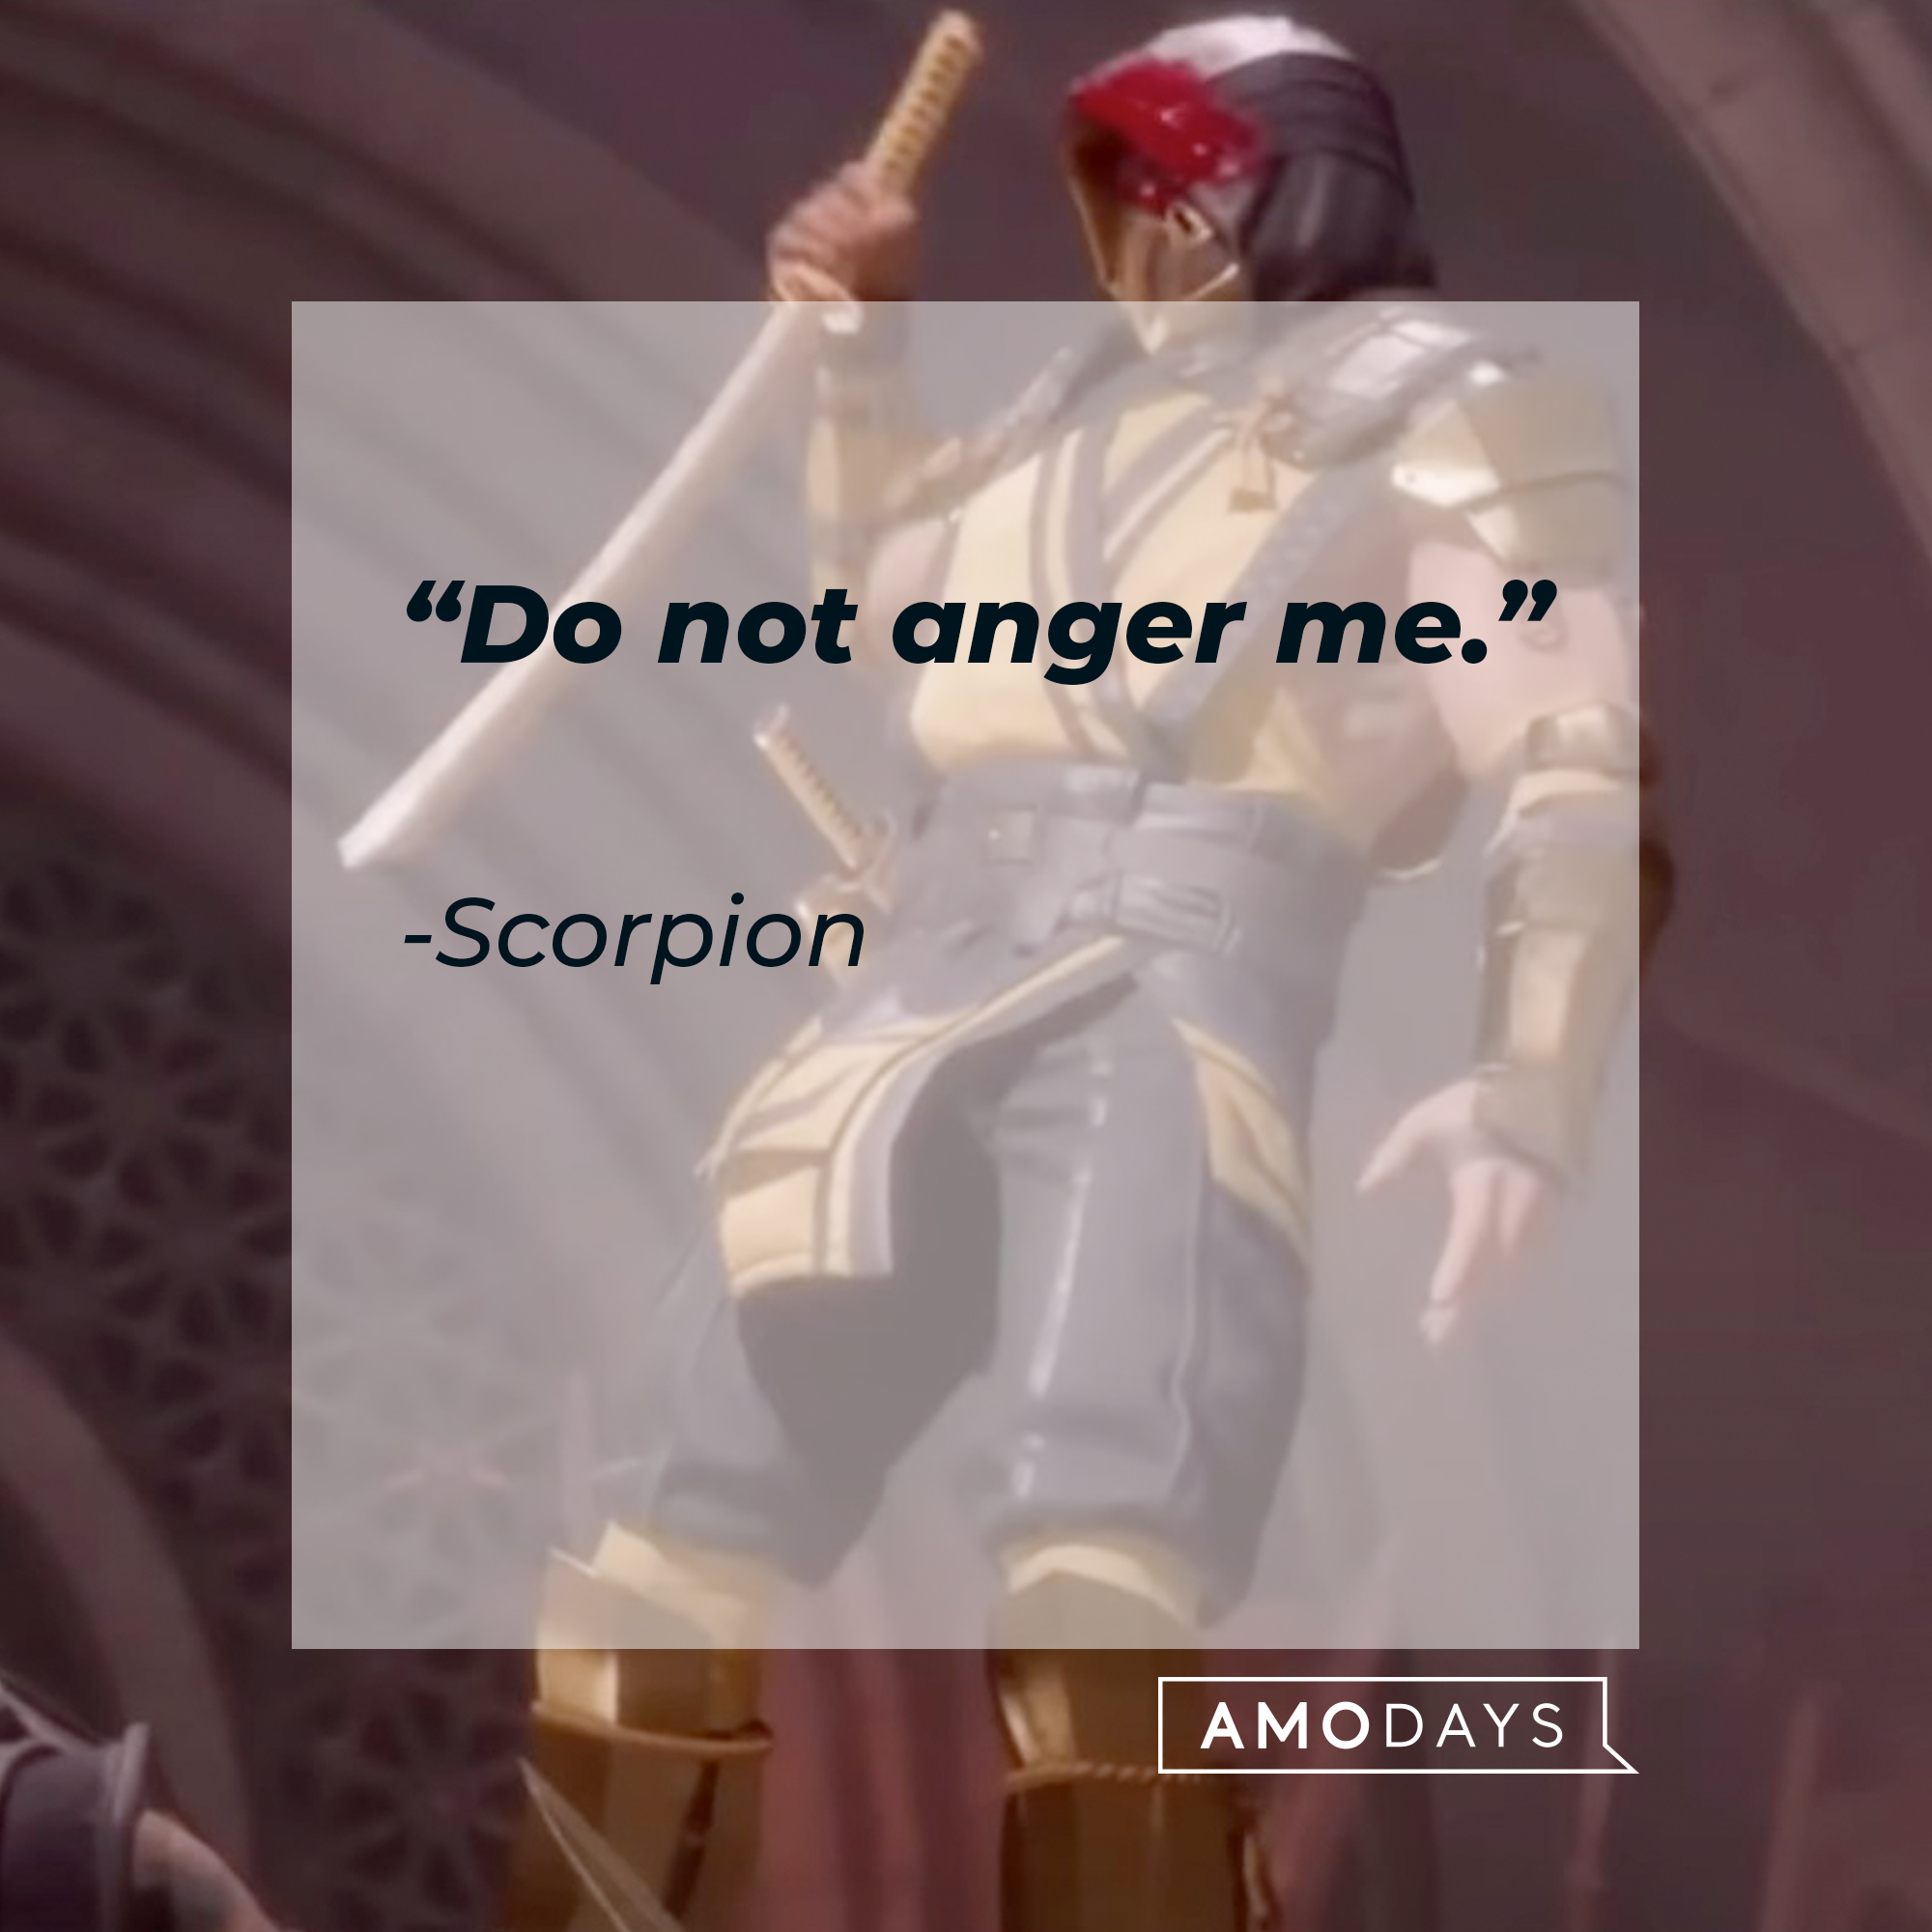 An image of Scorpion with his quote: “Do not anger me.” | Source: facebook.com/MortalKombatUK